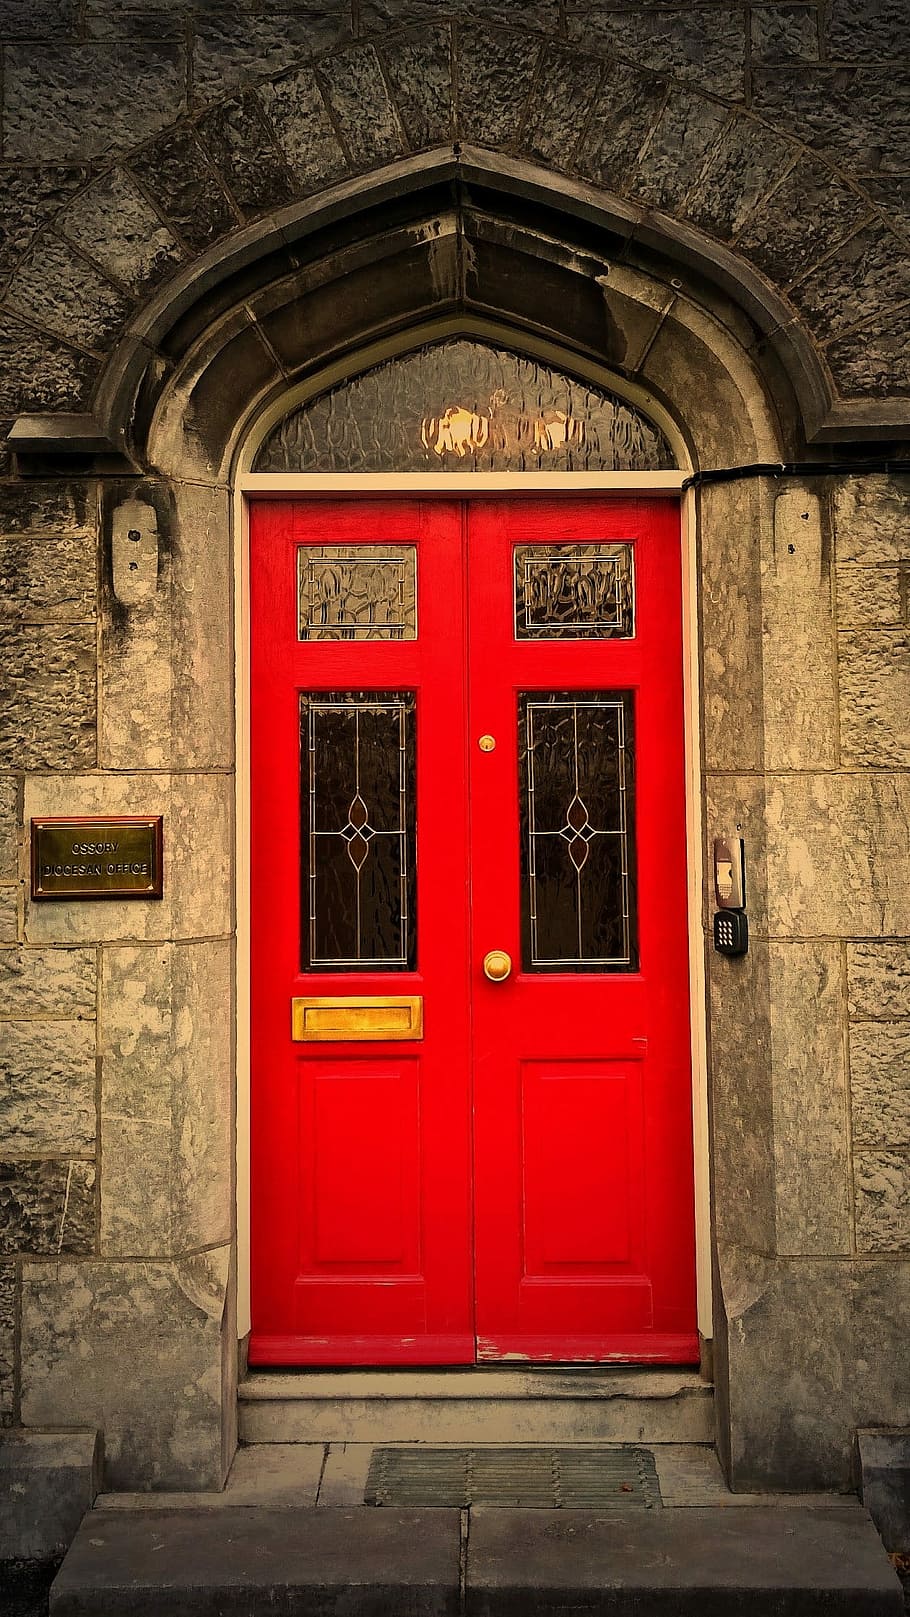 Door, Red, House, Doorknocker, Object, red, house, architecture, london, entry, sash